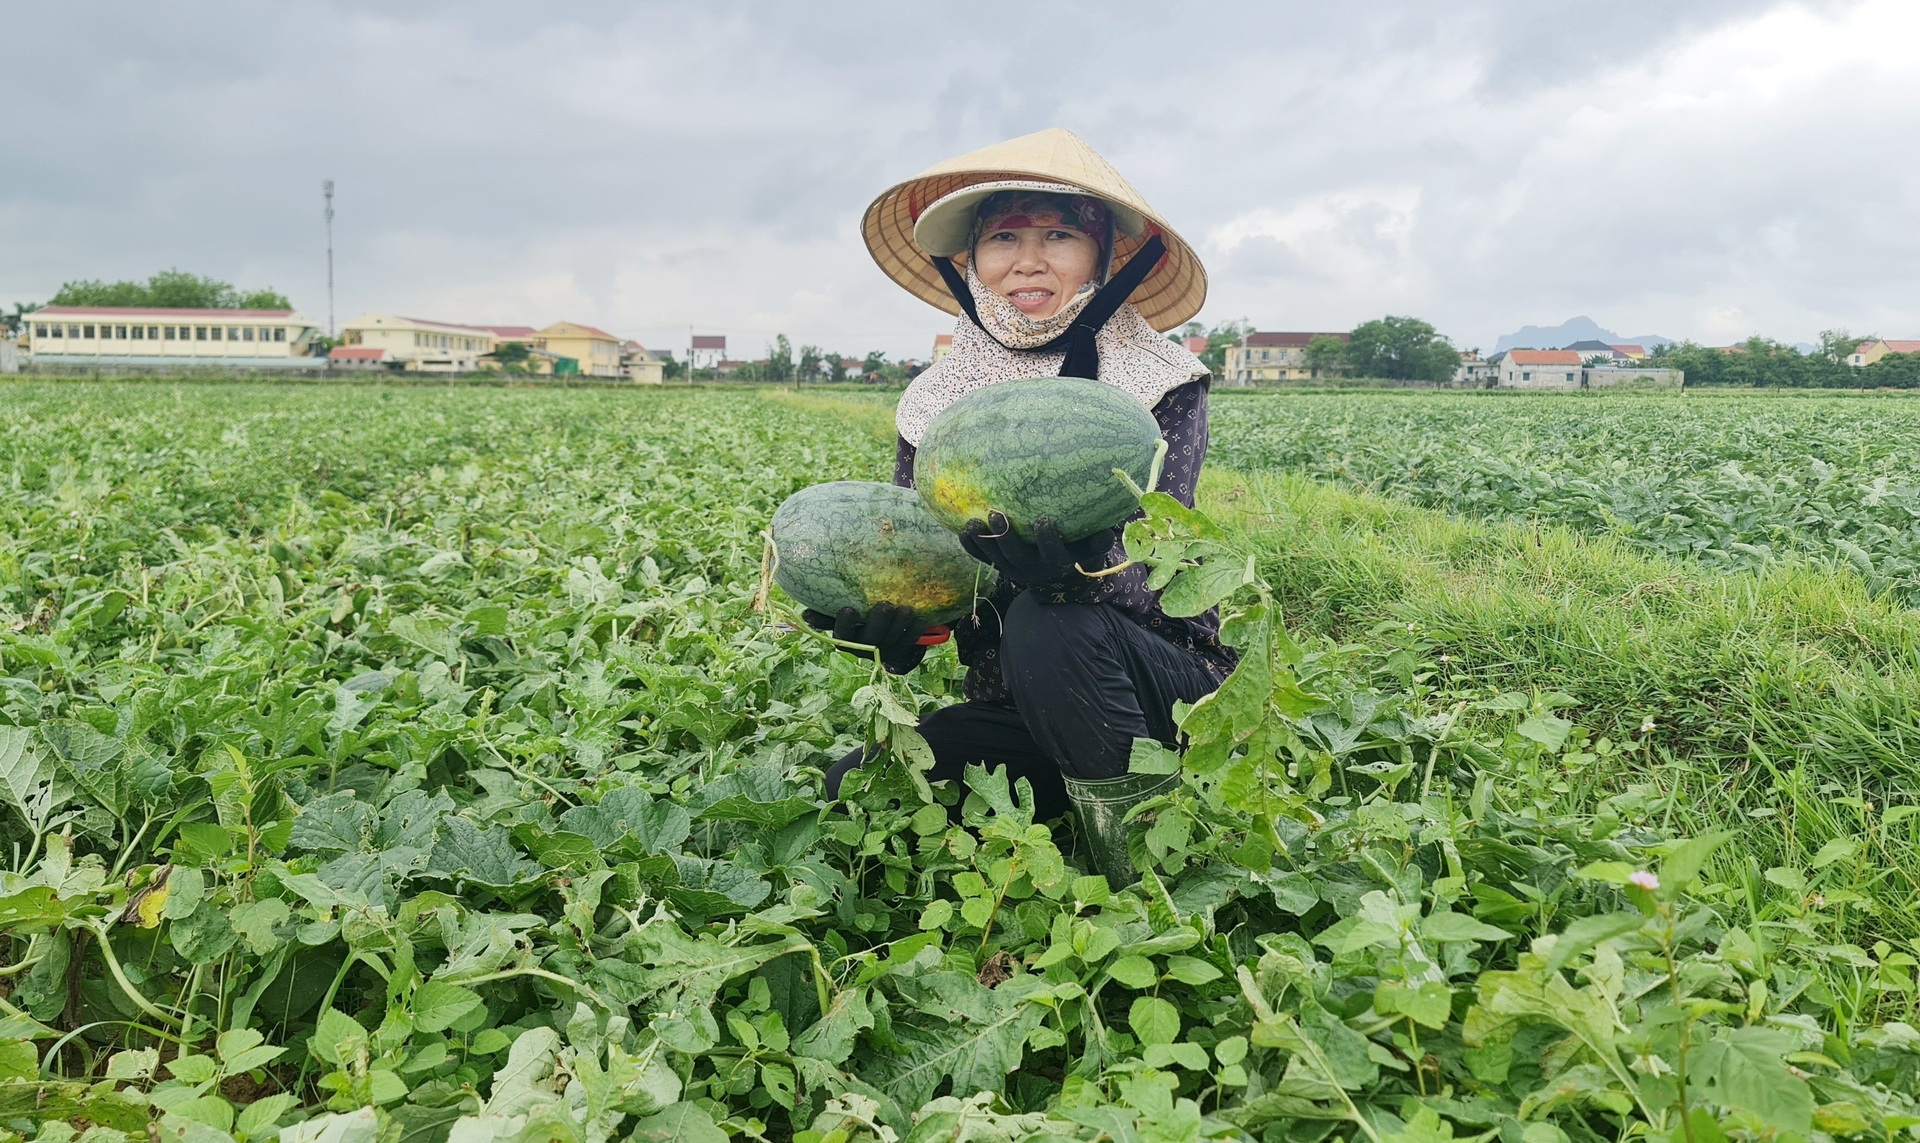 Ham Ninh watermelon is a popular product trusted by customers. Photo: T. Phung.